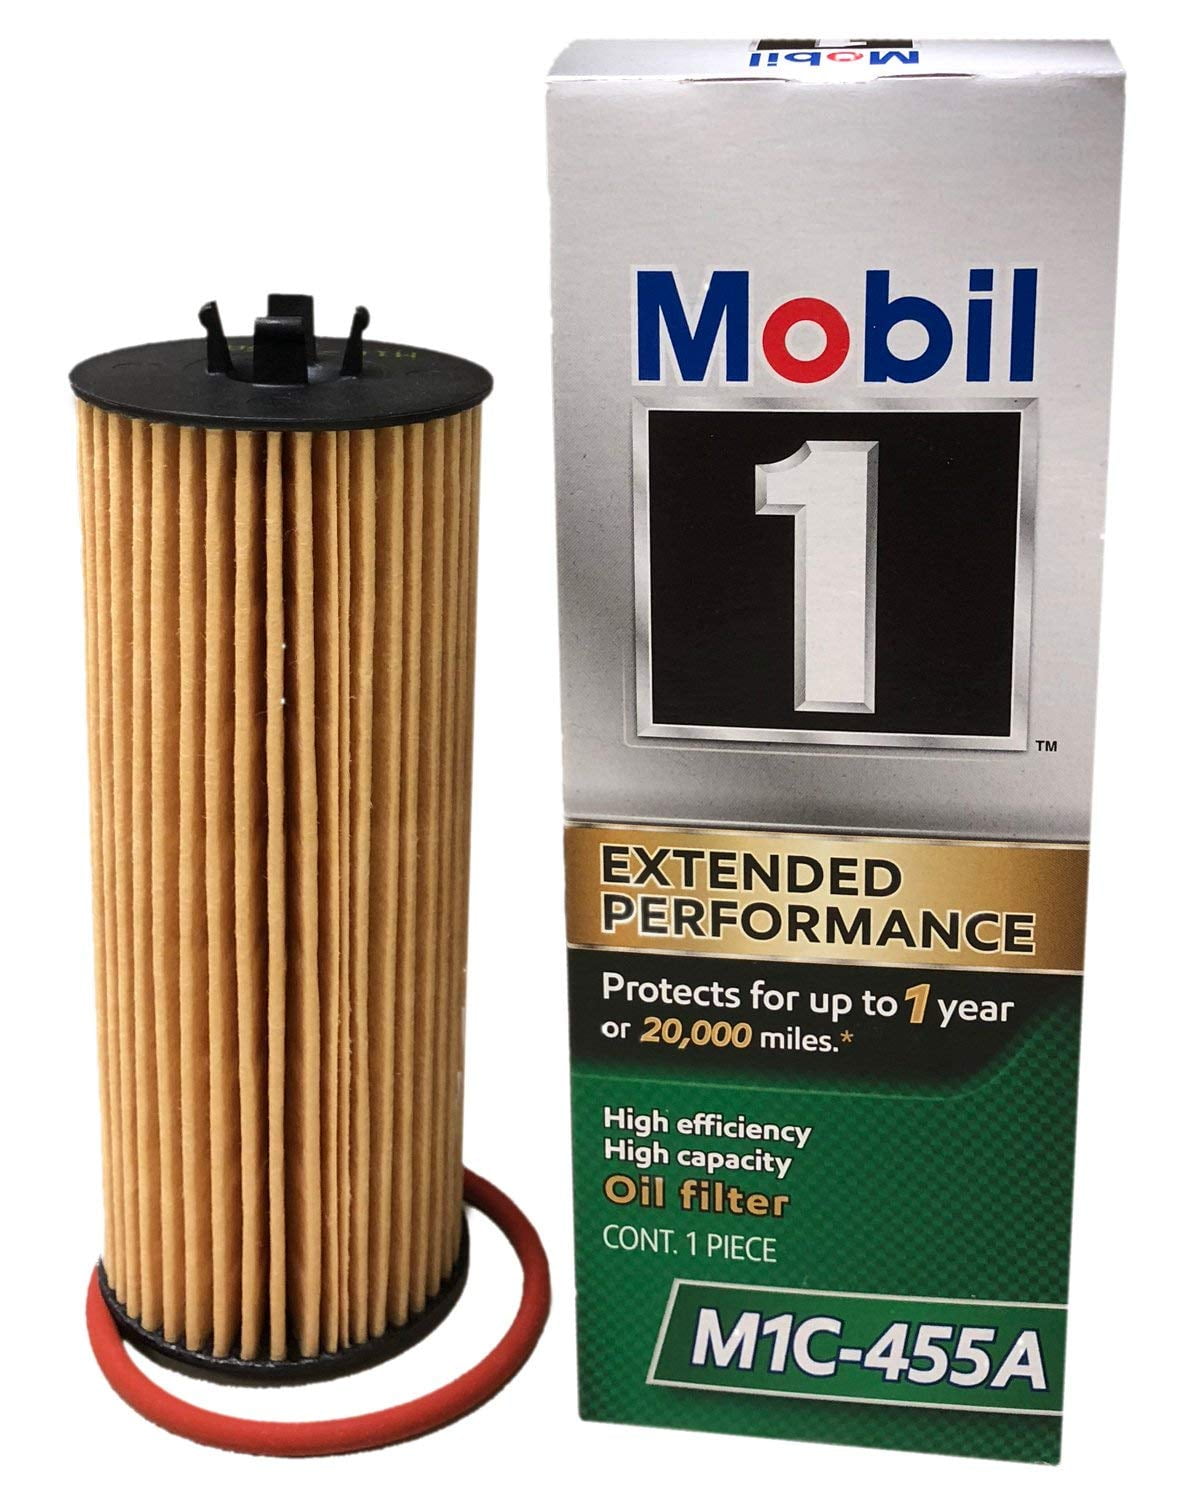 mobil-1-m1c-455a-extended-performance-oil-filter-walmart